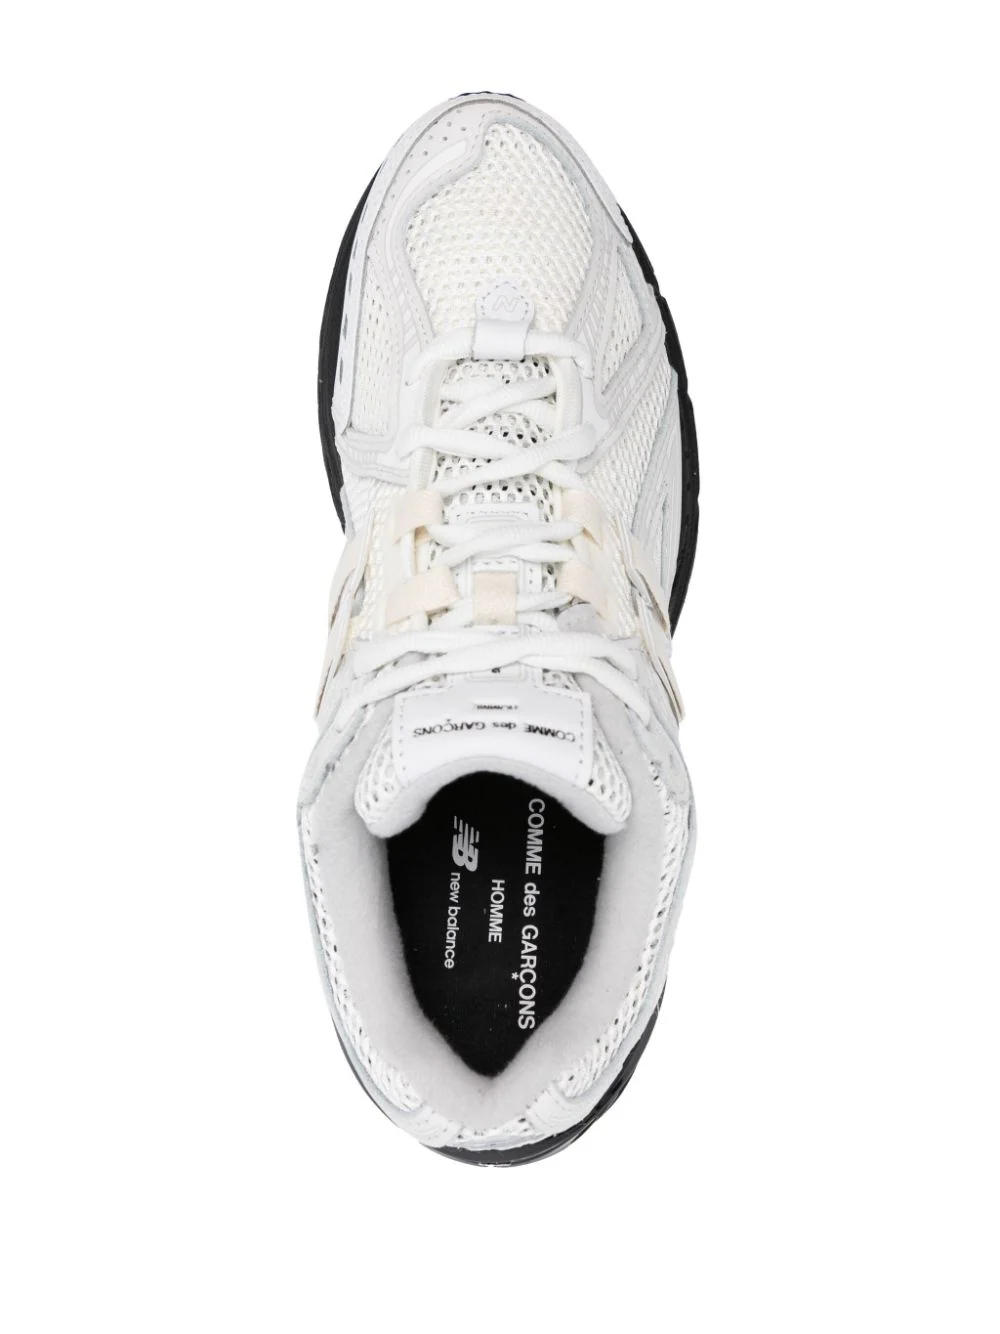 COMME-des-GARCONS-HOMME-NEW-BALANCE-1906-x-CDG-HOMME-Sneakers-White-4